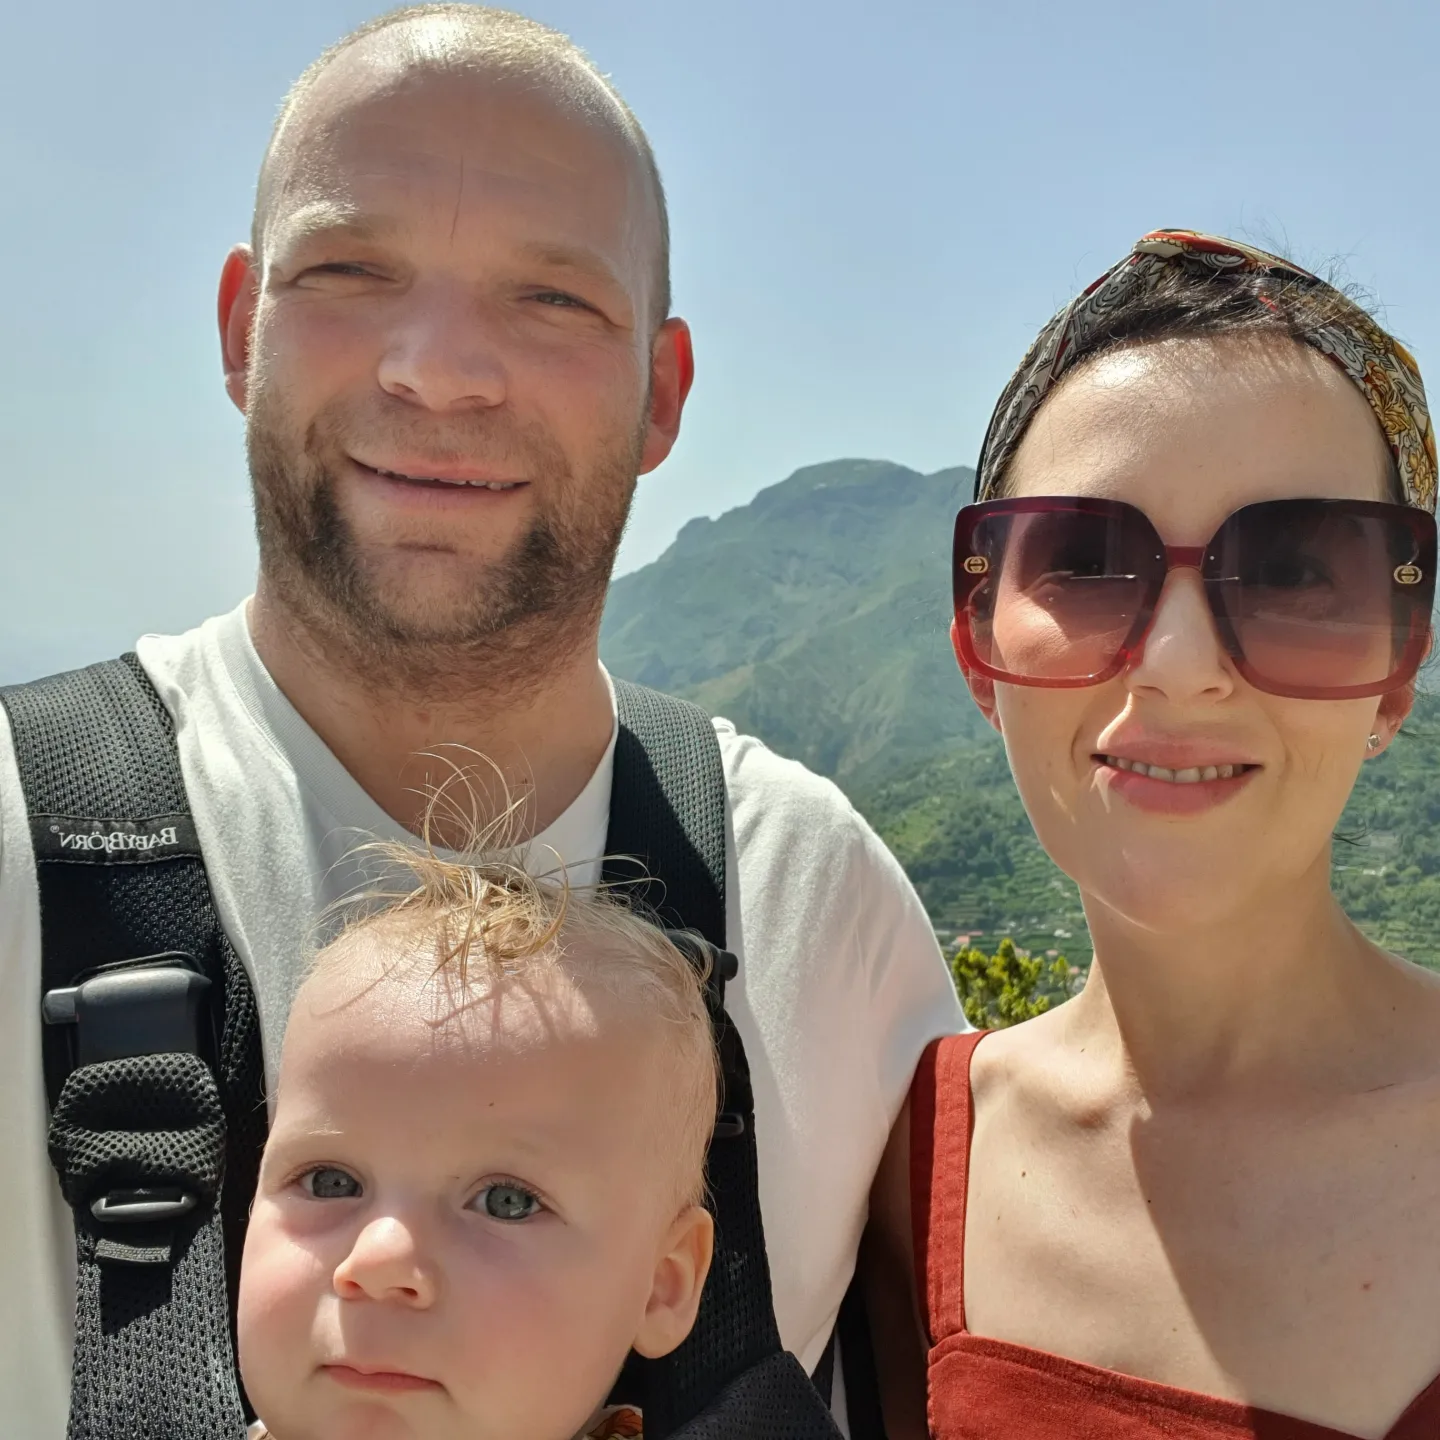 The couple and their daughter on holiday in Europe